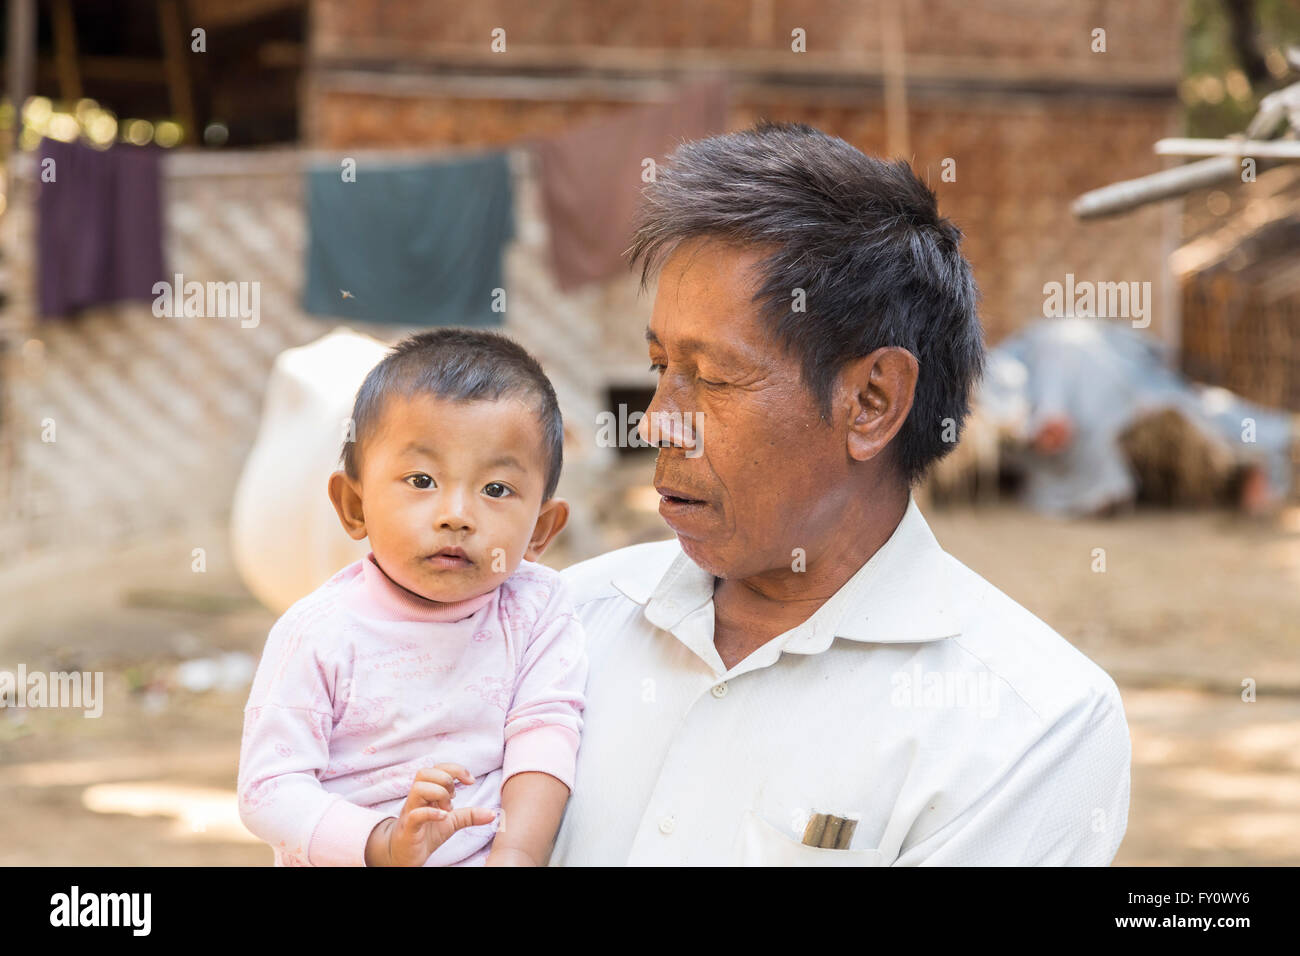 Local villager, a proud father holding his baby son in a village on the Irrawaddy River, Myanmar (Burma) Stock Photo